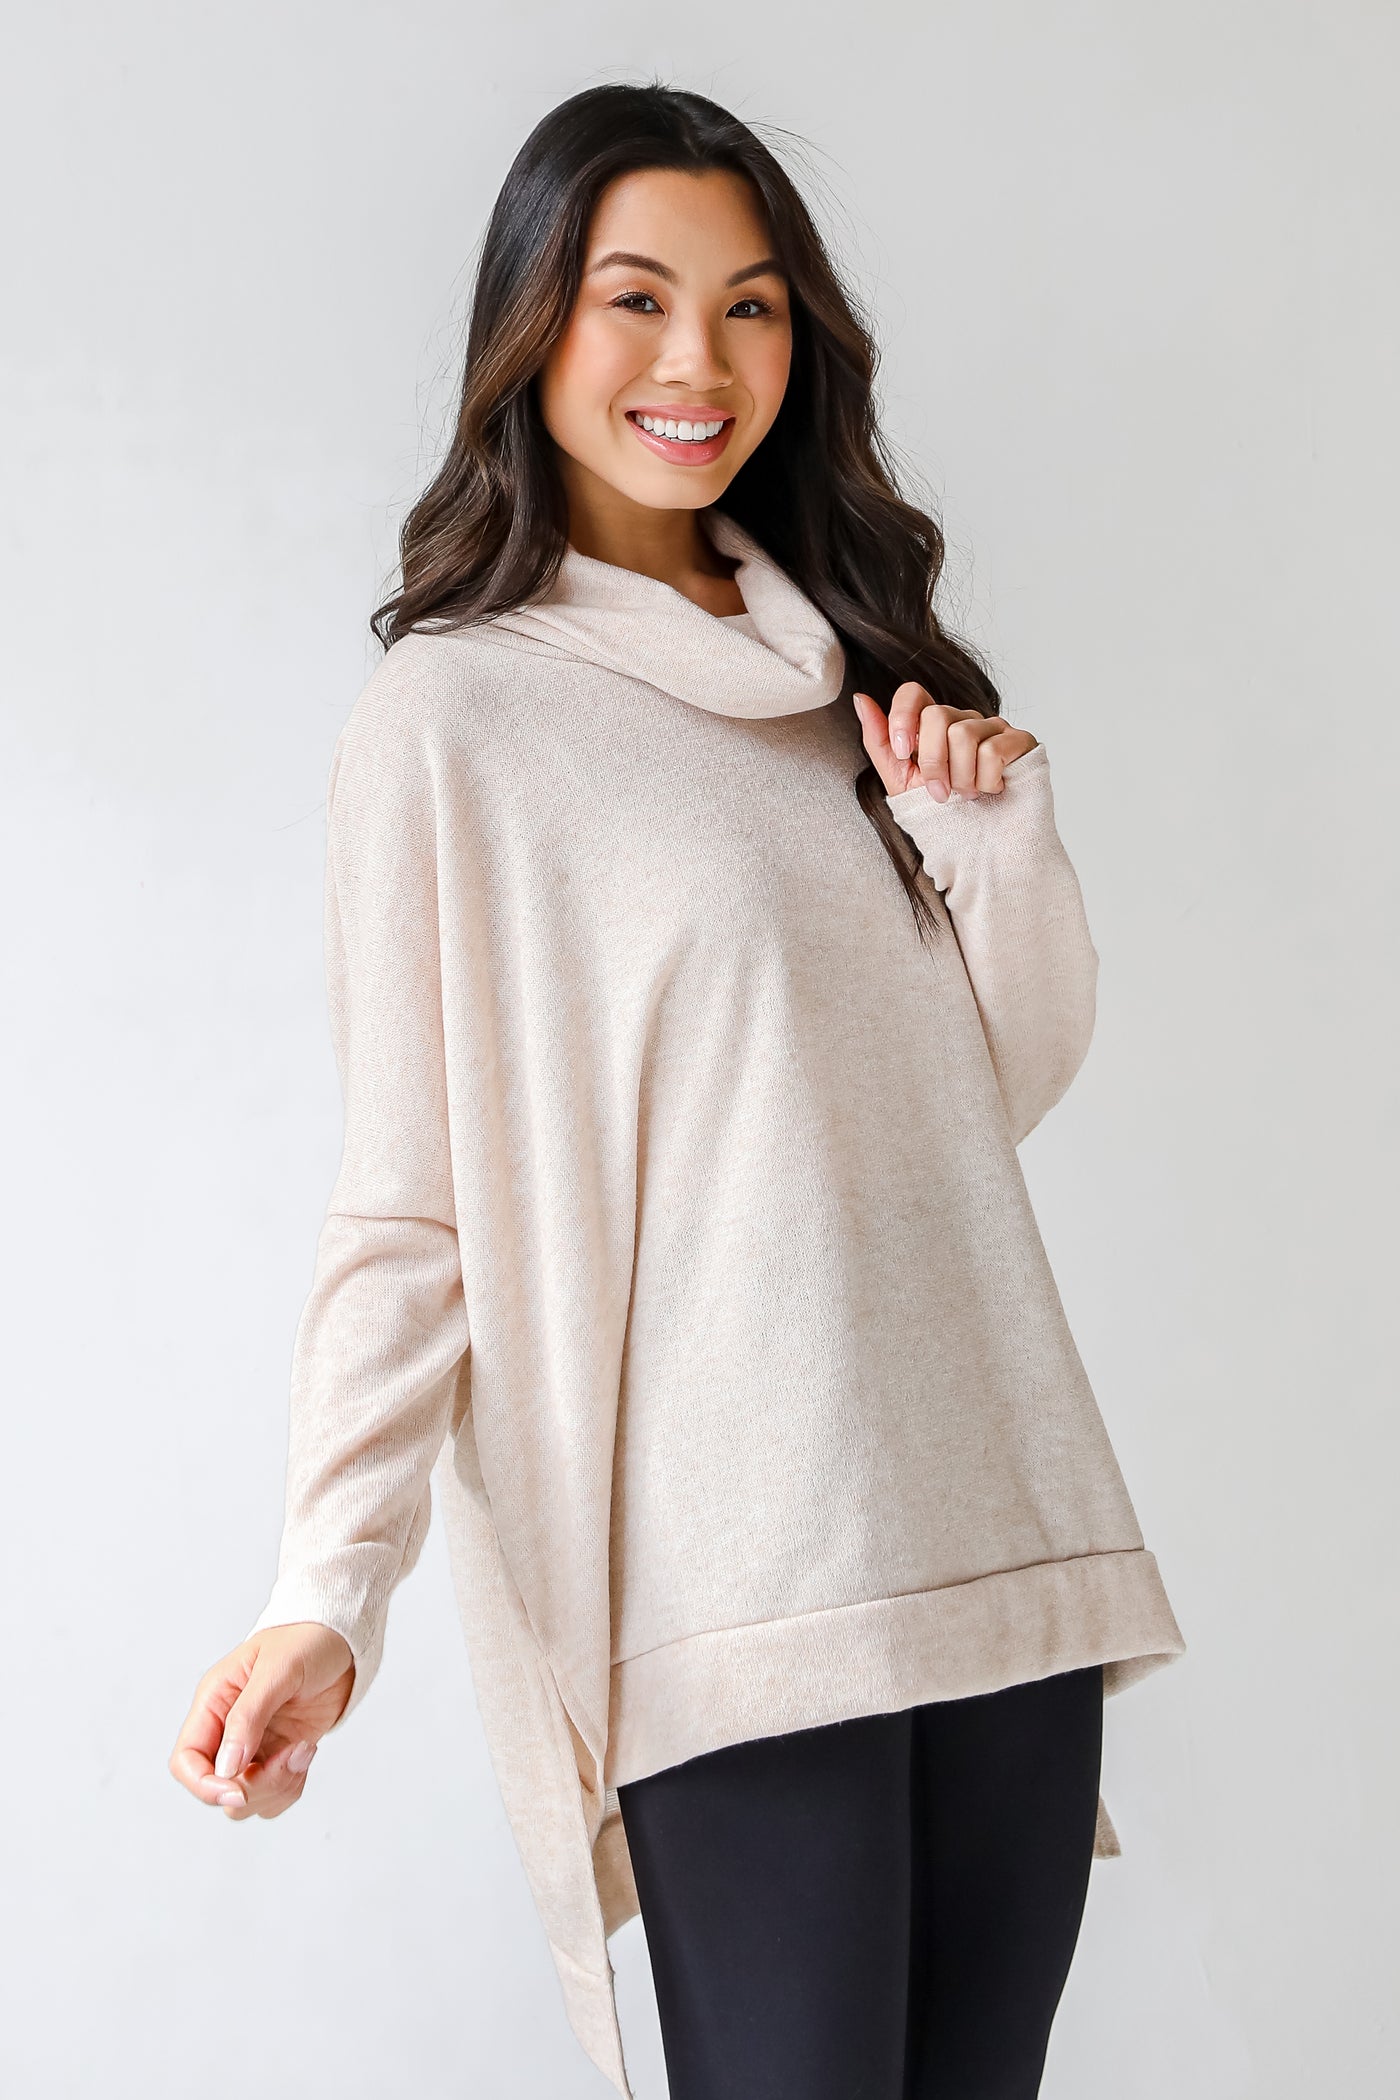 Cowl Neck Knit Top in oatmeal side view